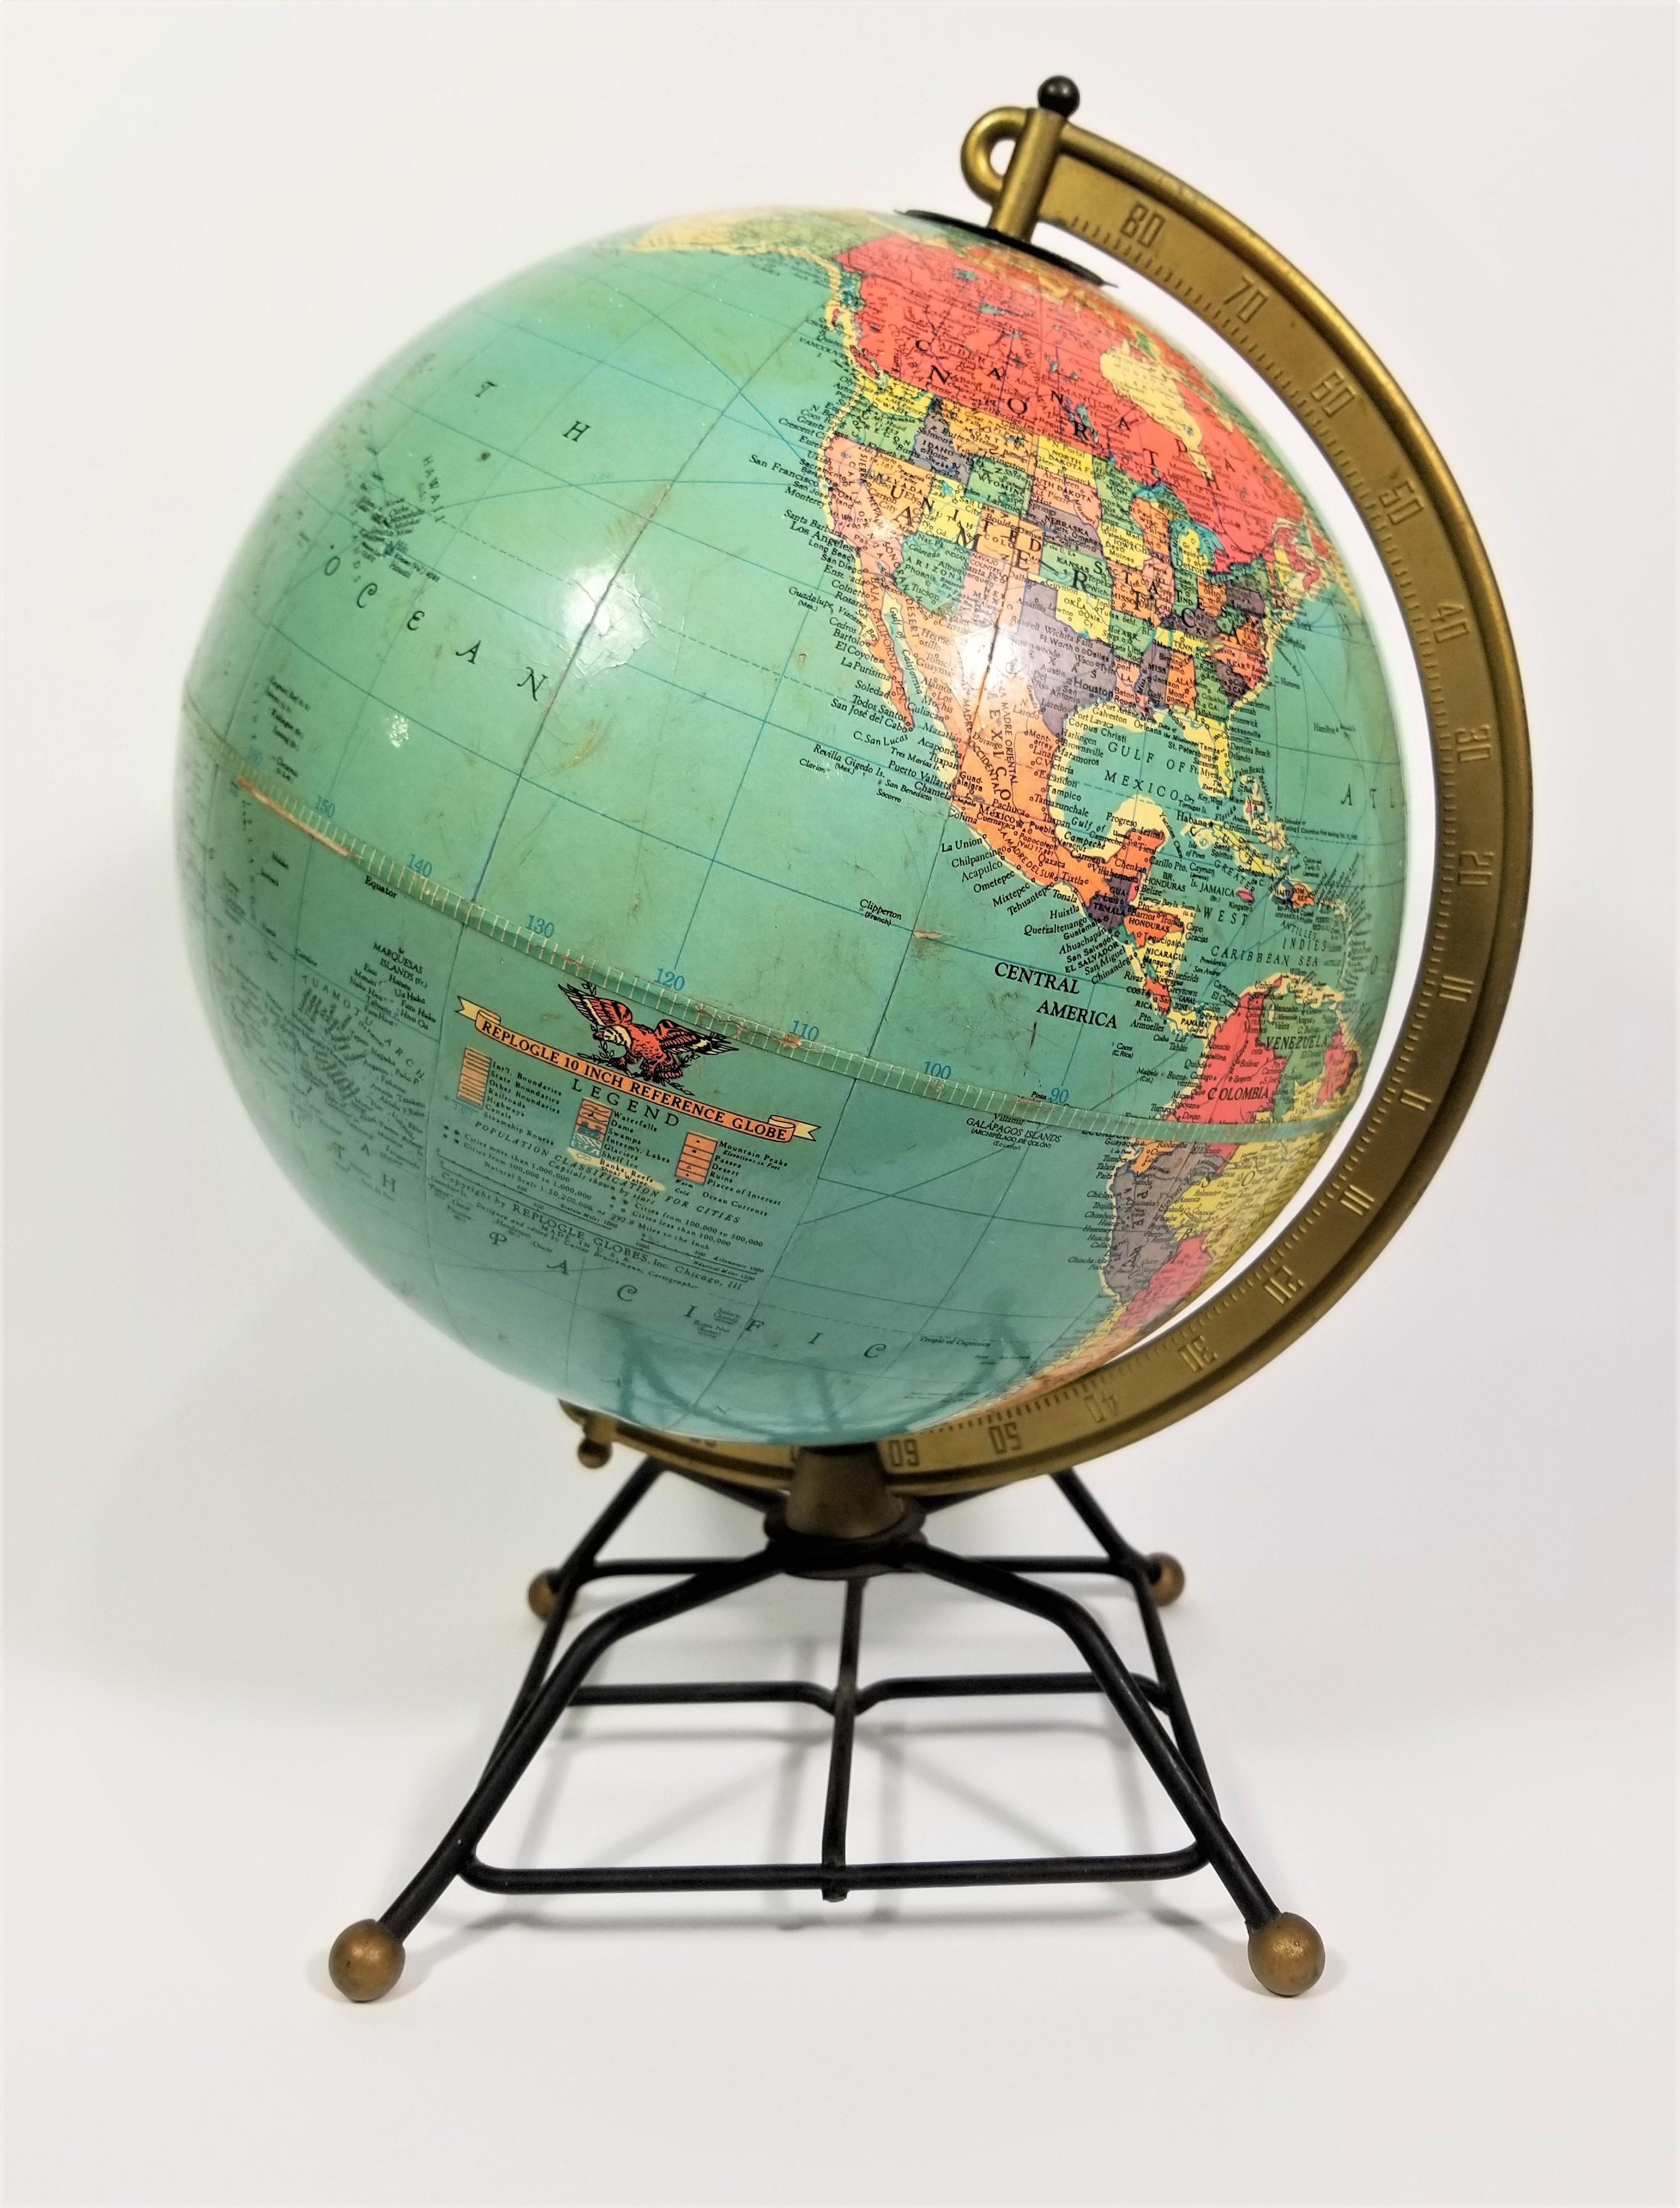 1950s mid century Reference Globe by Replogle Rare 10 inch size. Actual Globe is 10 inch not including stand. Slightly smaller than average globes makes it ideal for desk top or shelves.